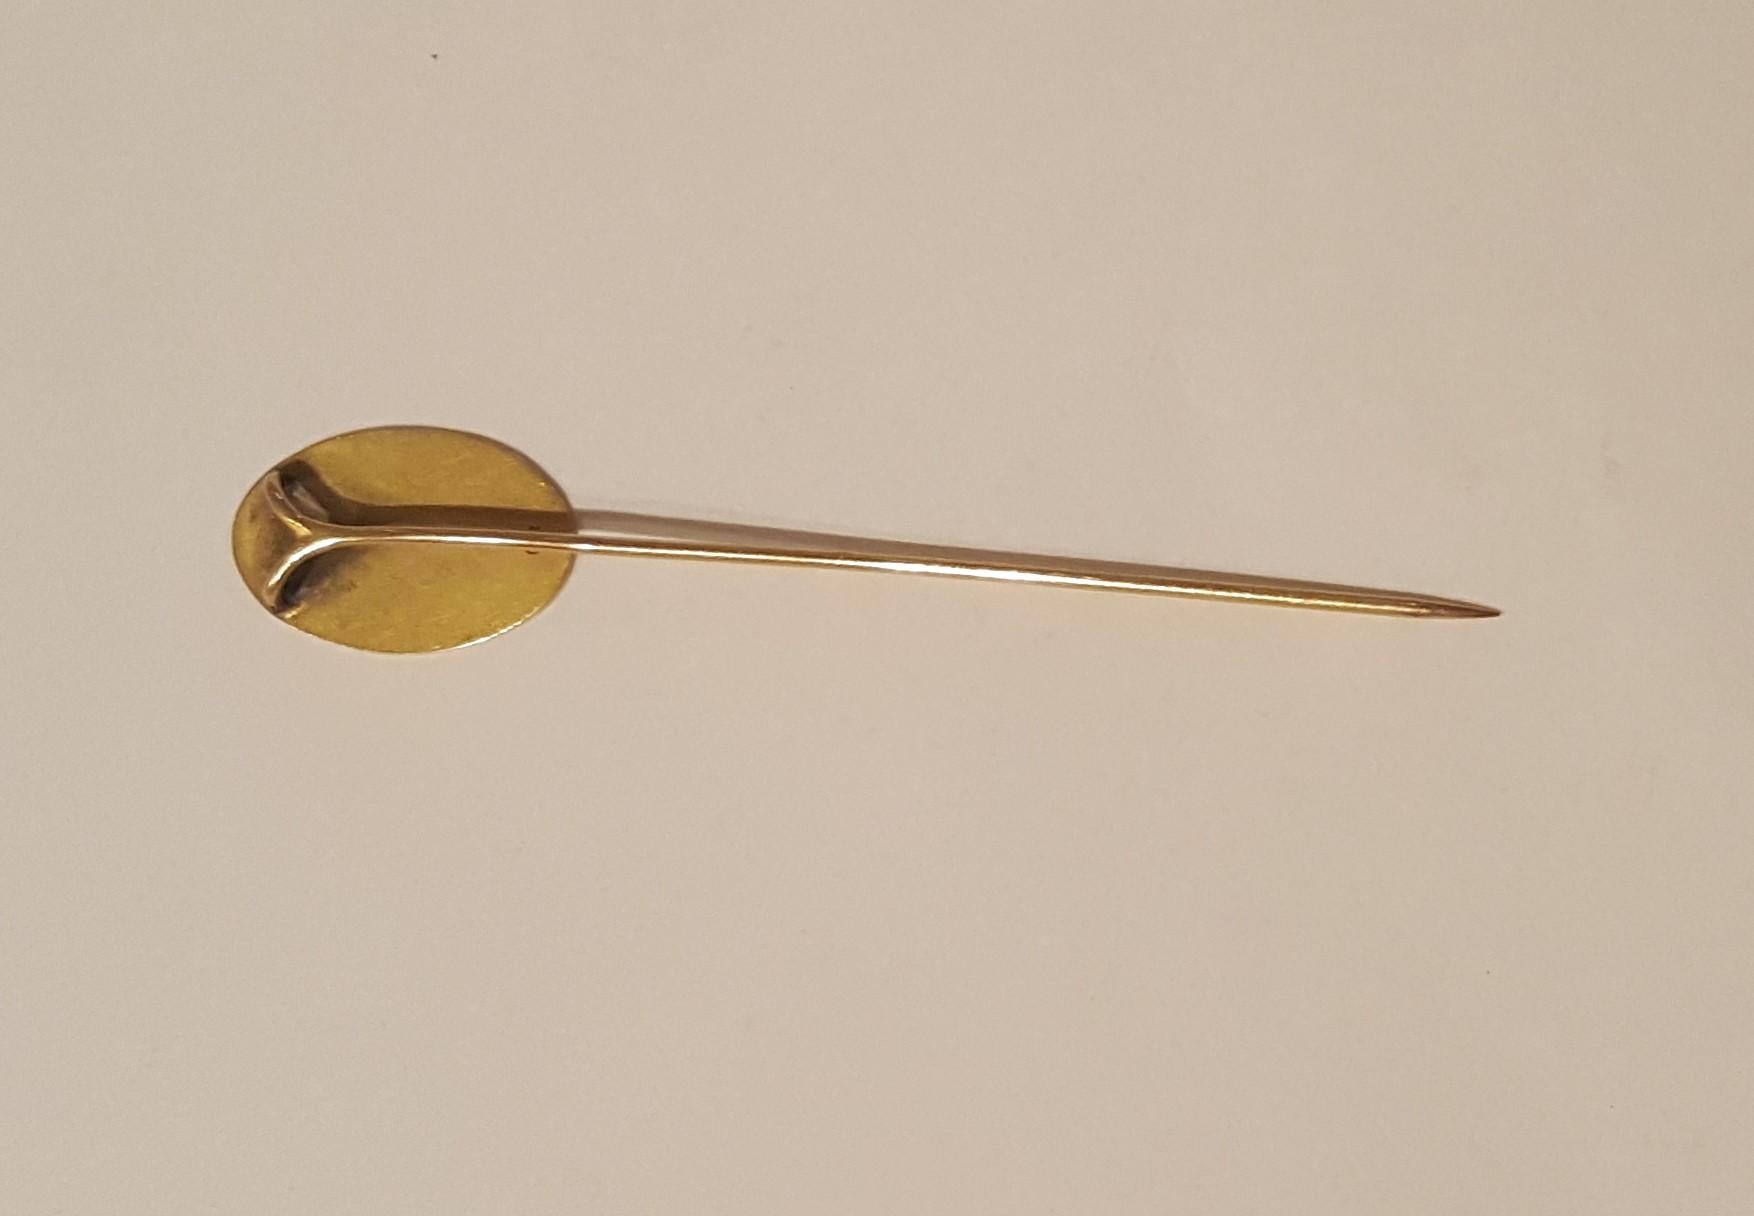 Vintage 10kt yellow gold stickpin by Designer Harry S Bick. The 3/4 inch oval at the top of the pin appears to have monogram lettering, however, it appears as a scroll design. Weighs 1.6 grams. This lovely vintage stickpin could be used on a lapel,